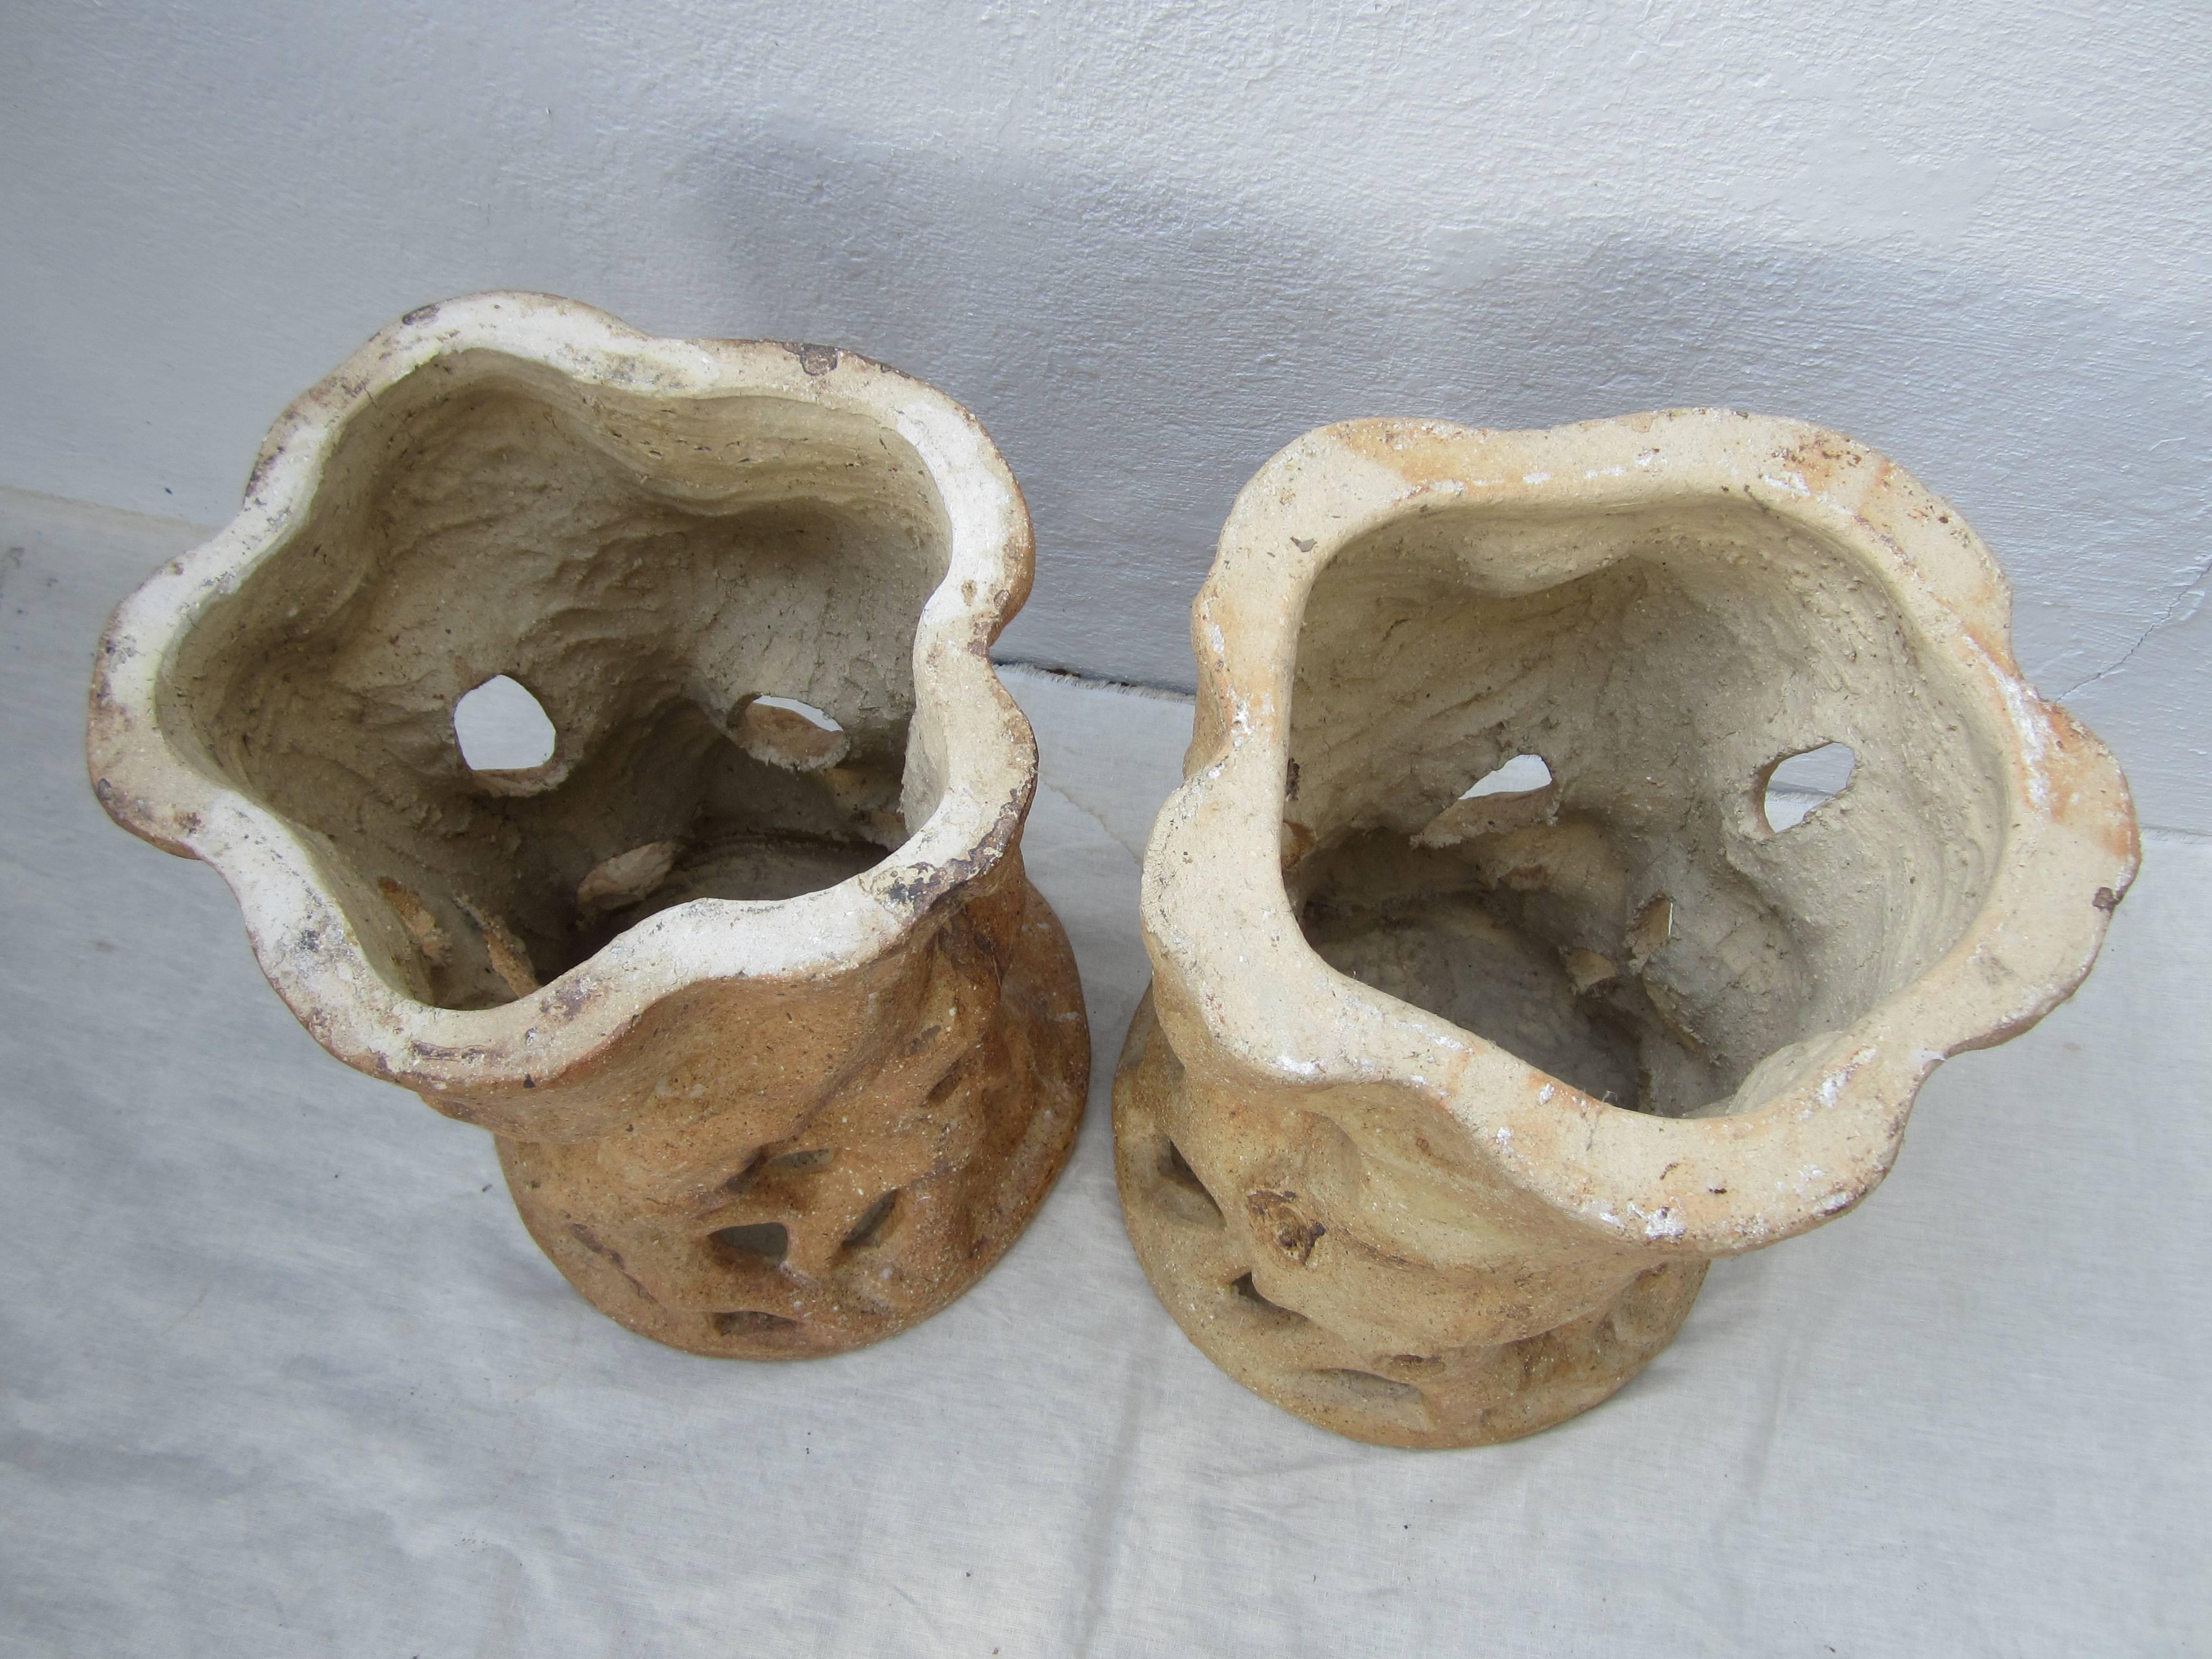 Naturalistic faux bois garden stools/side tables great indoors or outdoors.